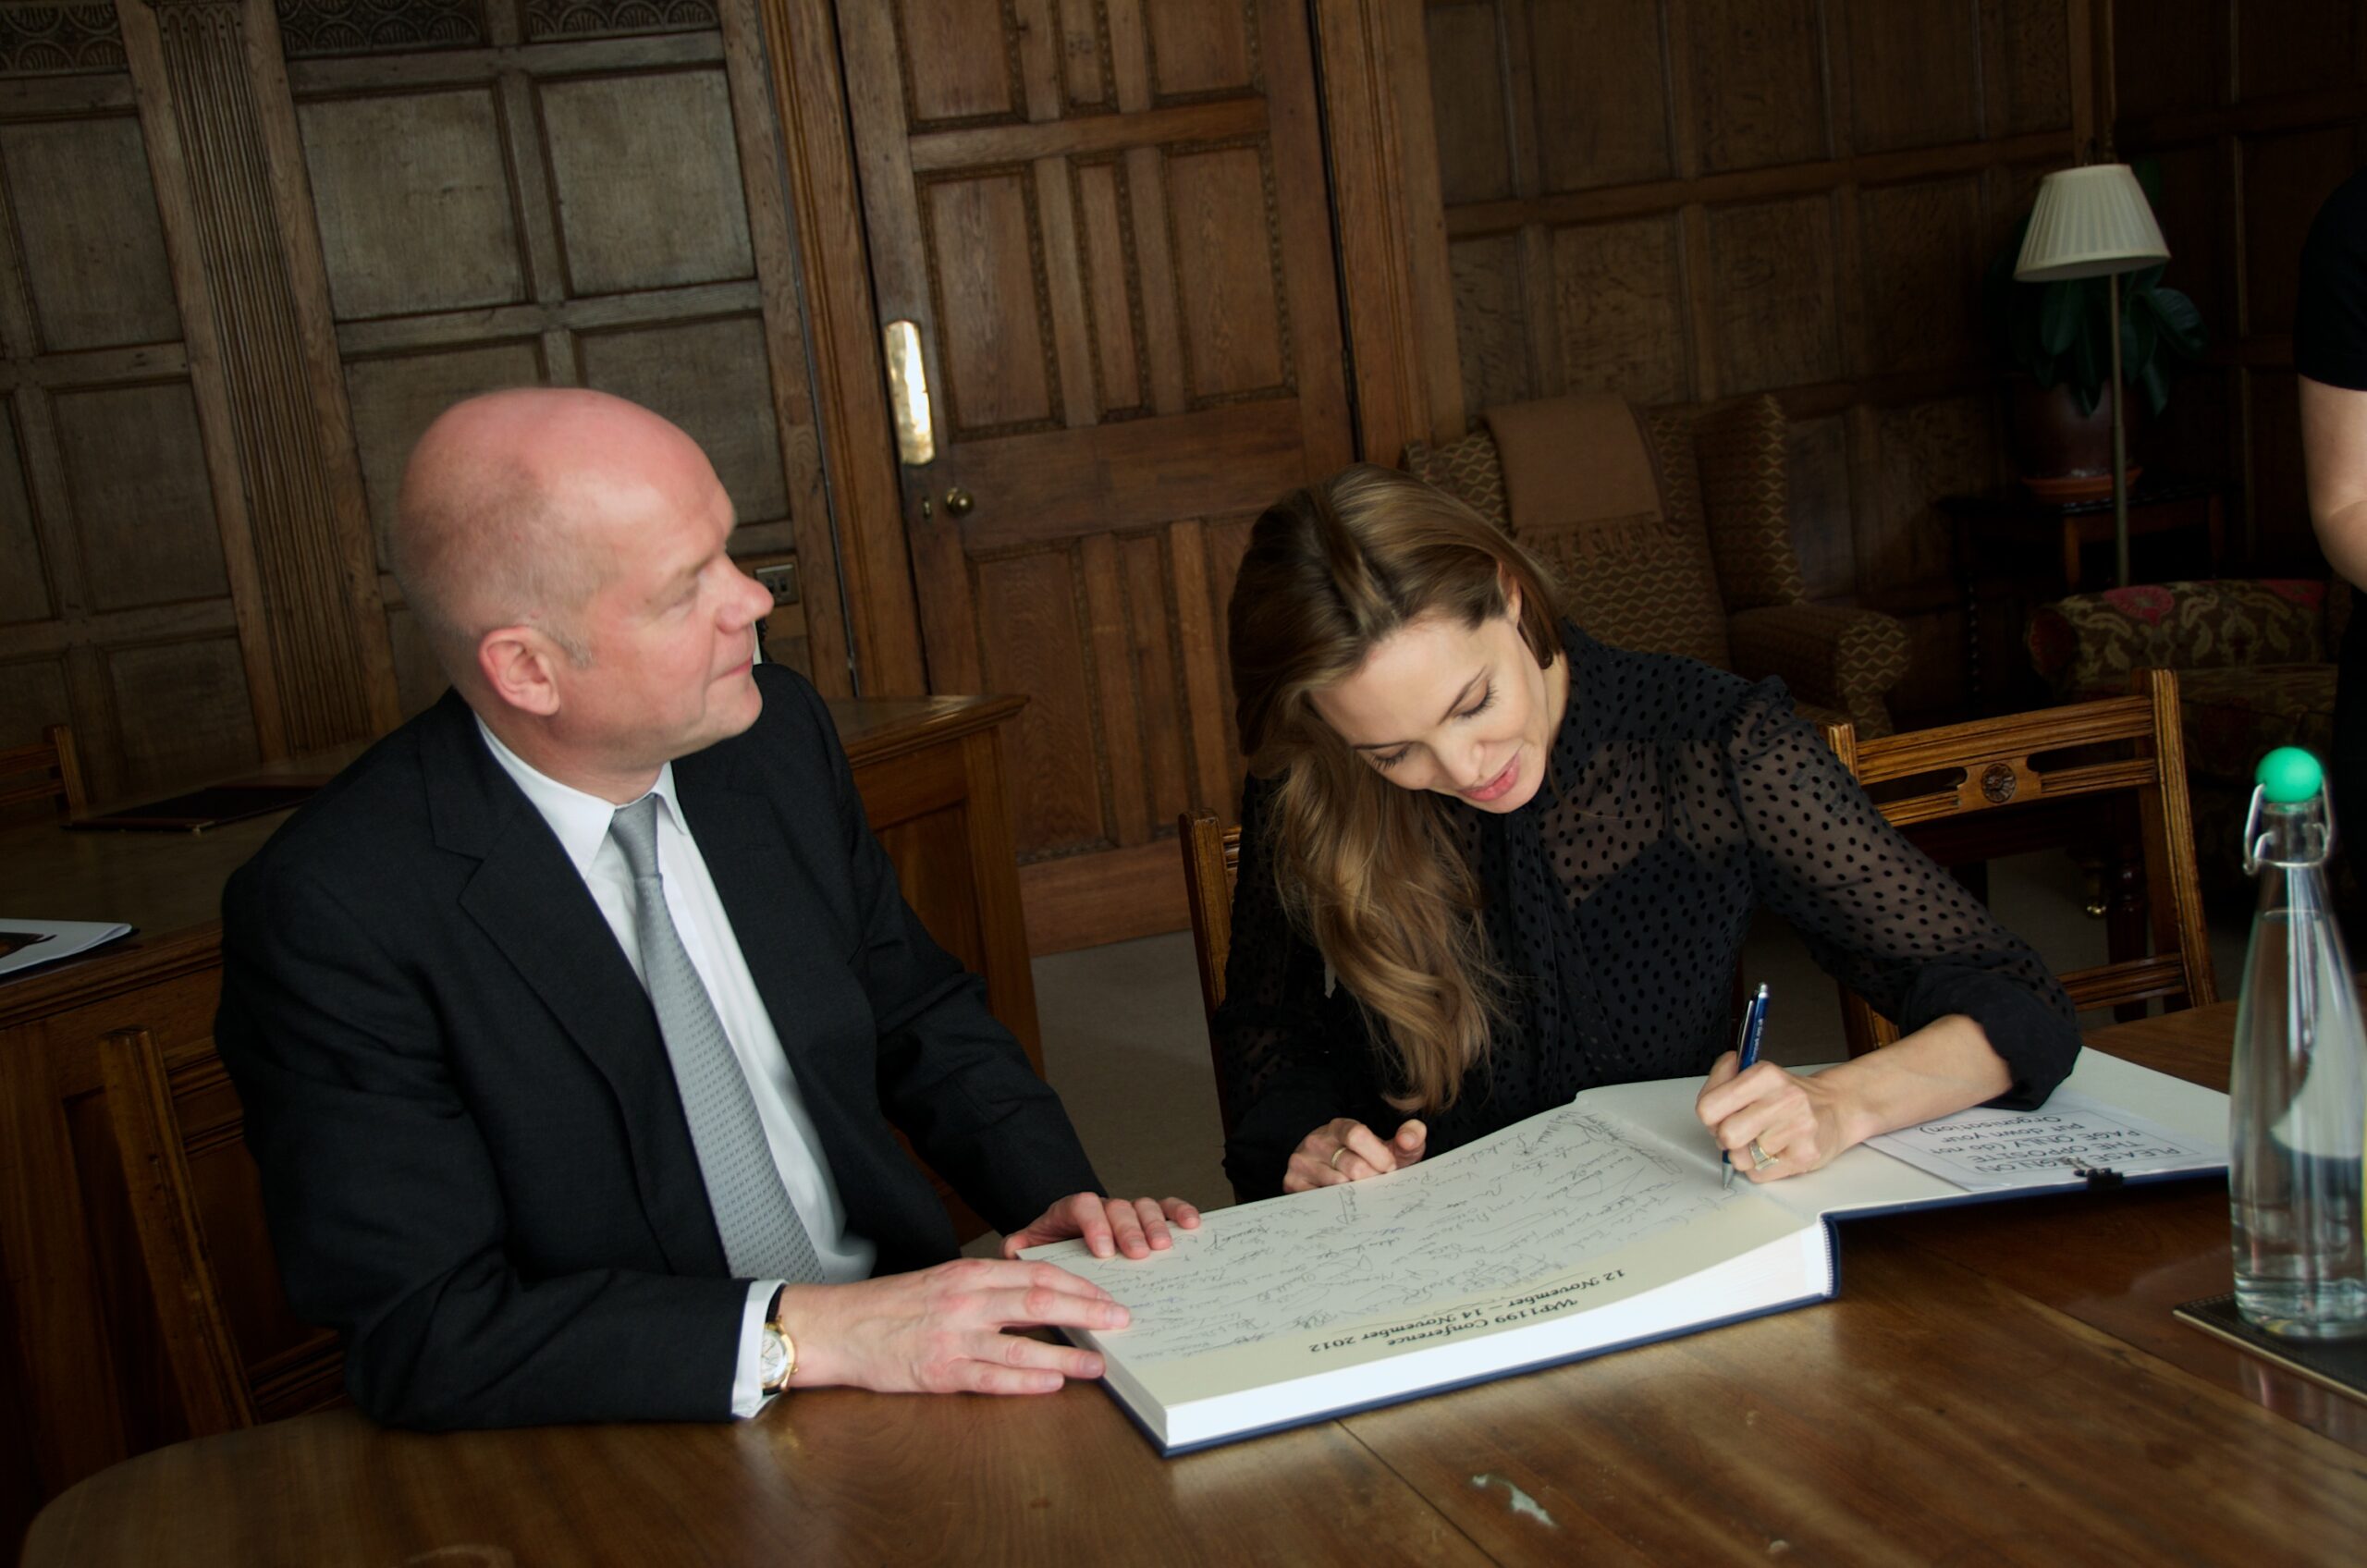 William Hague and Angelina Jolie signing the Golden Book at Wilton Park